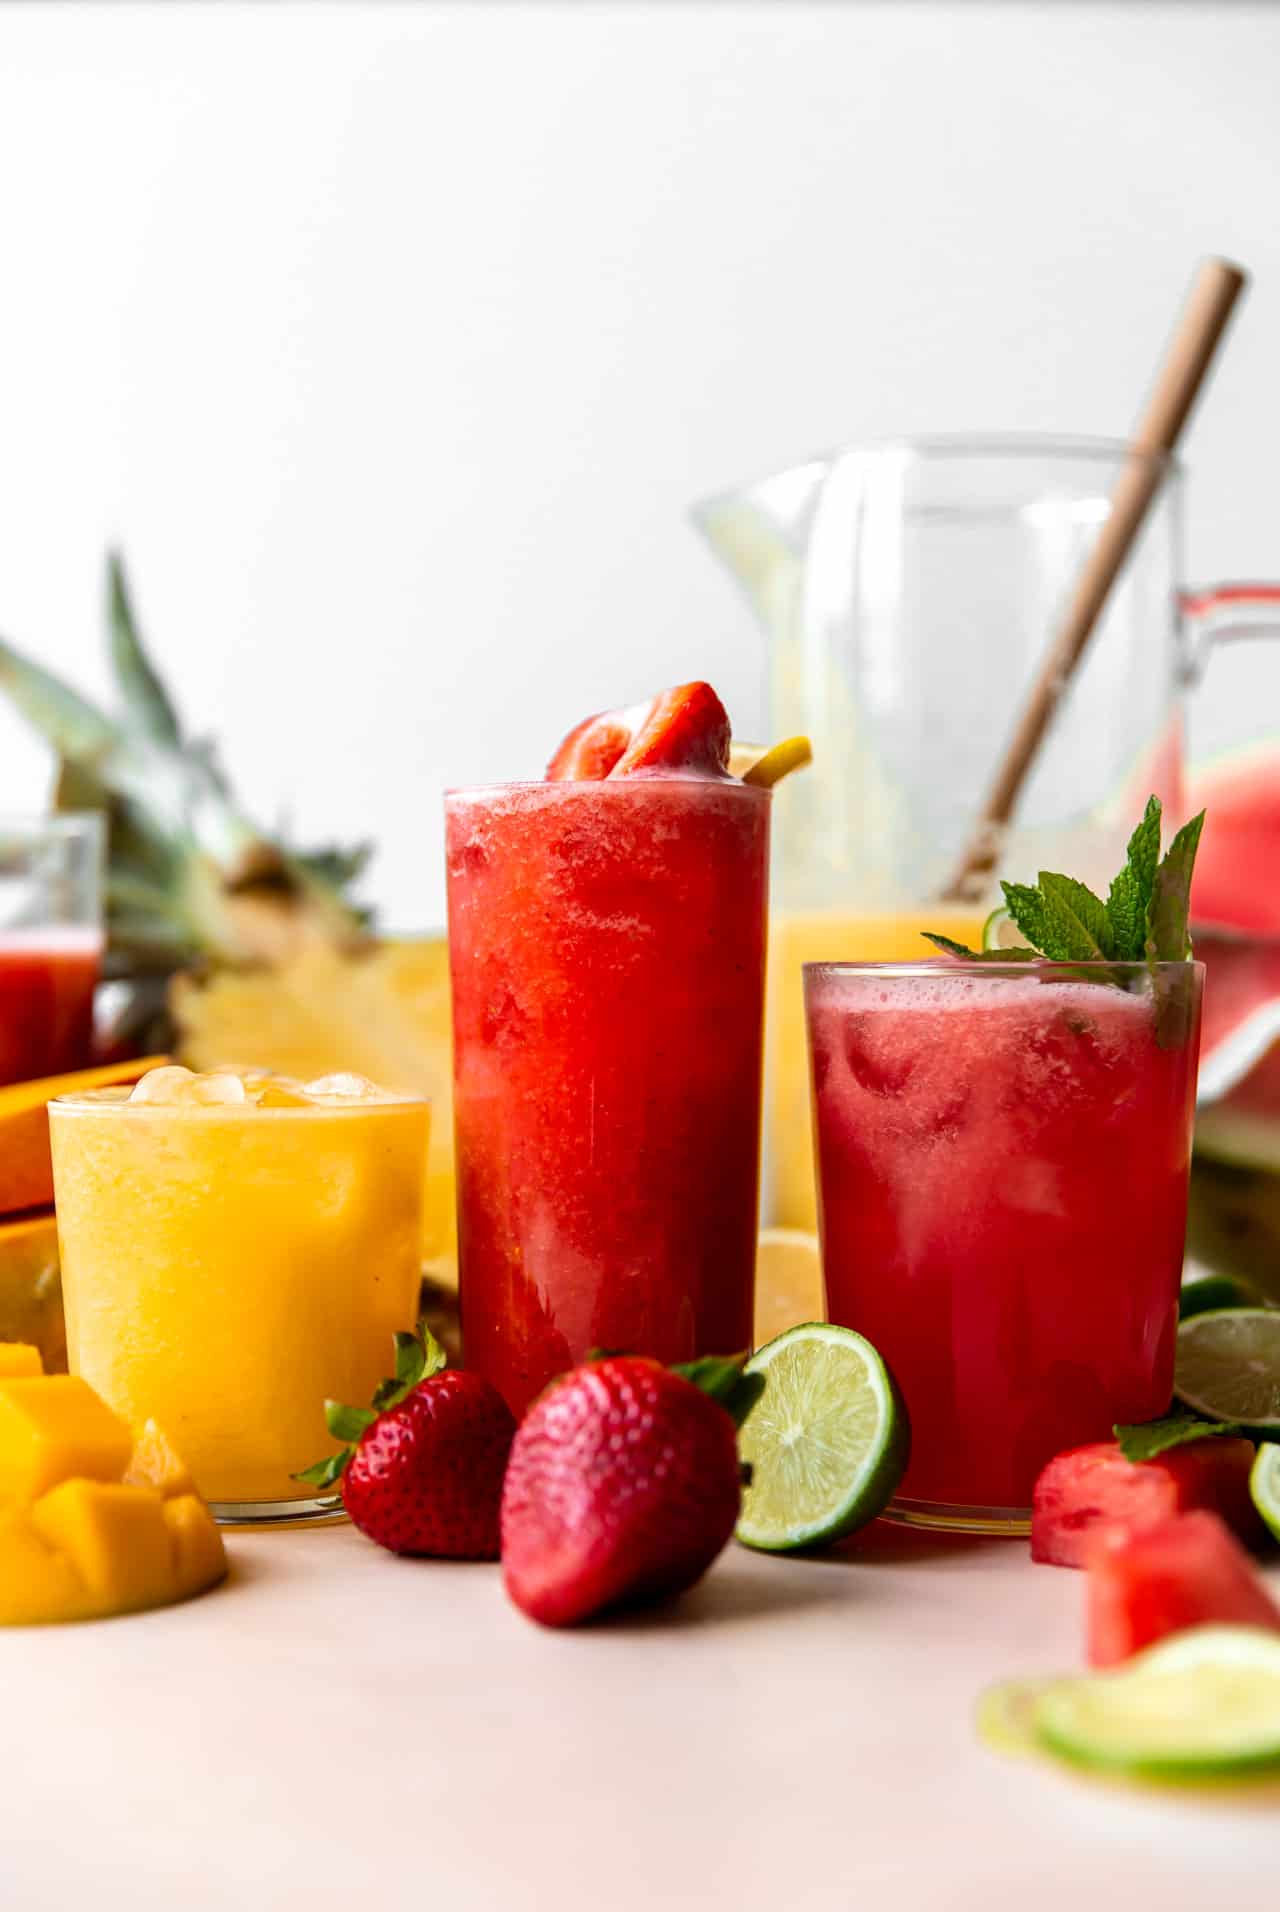 Glasses of agua fresca lined up showing strawberry, watermelon and a pineapple mango.